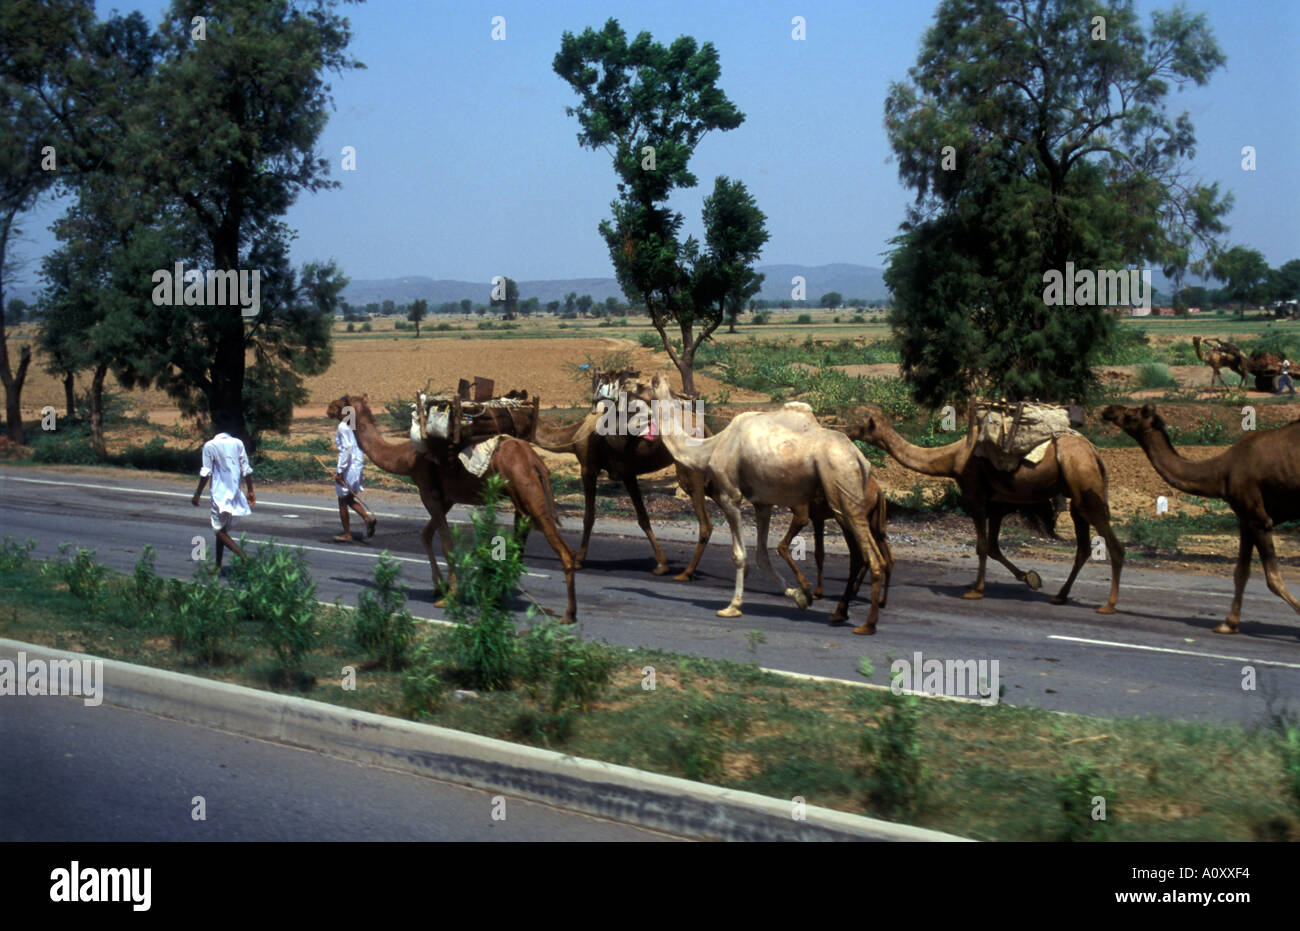 A Camel train or caravan on a rural road in India Stock Photo